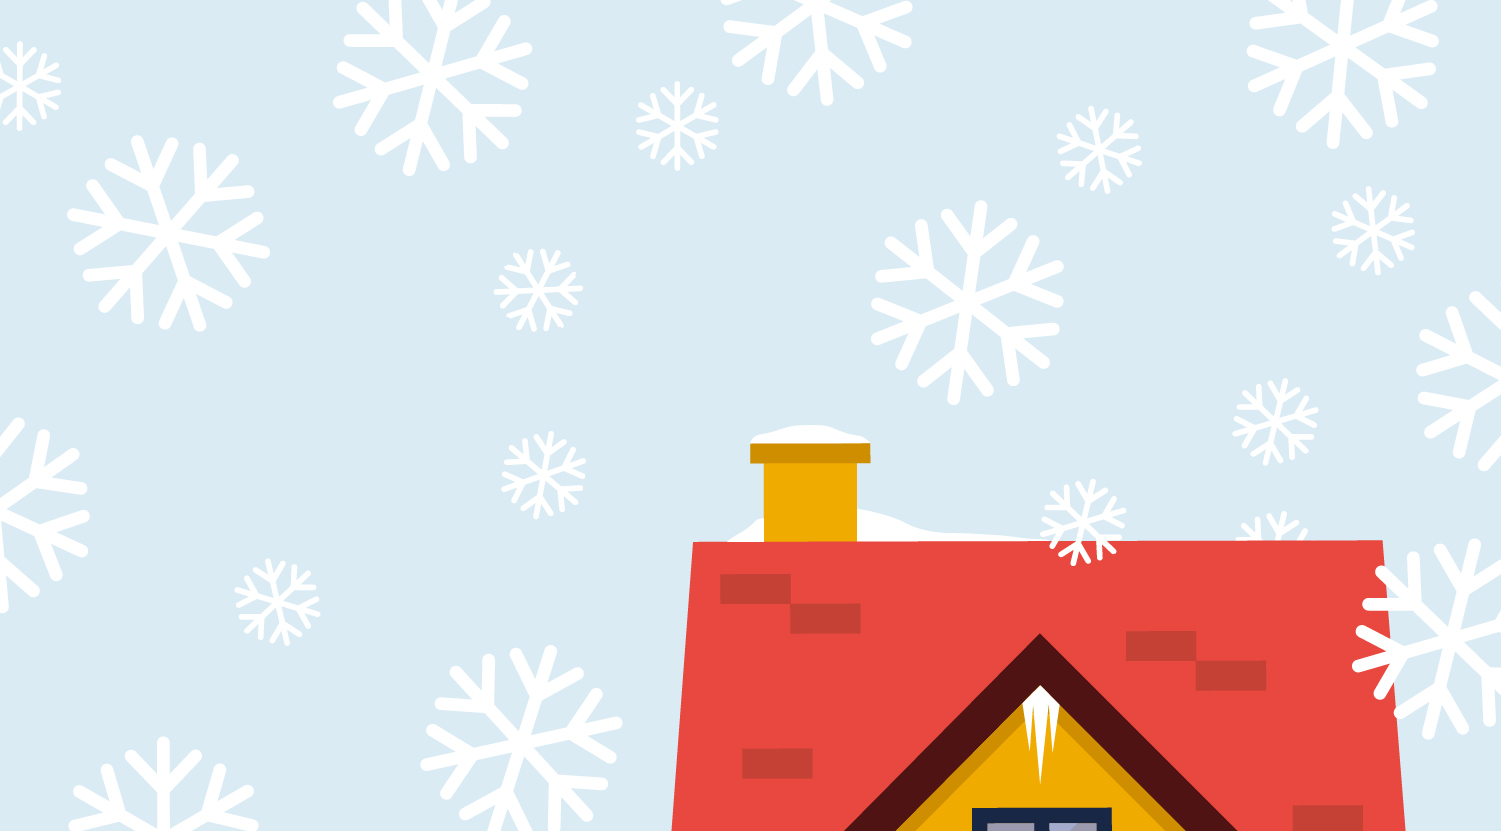 Snowflakes falling on a house